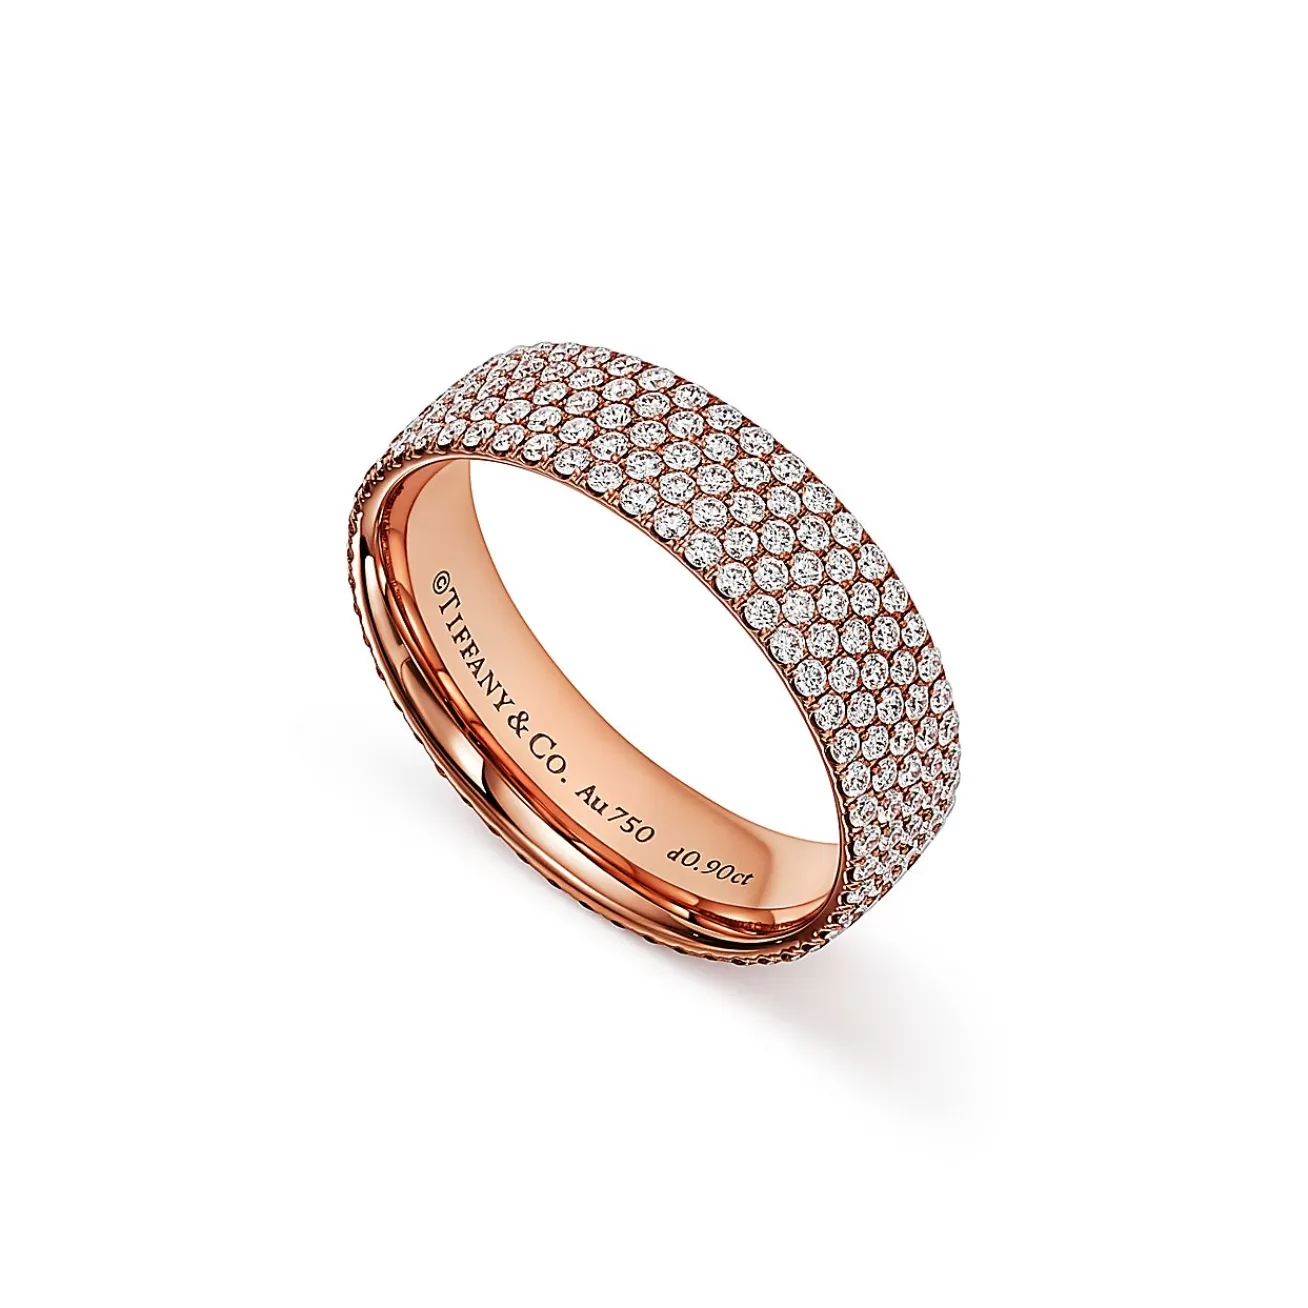 Tiffany & Co. Tiffany Metro Five-row Ring in Rose Gold with Diamonds | ^ Rings | Stacking Rings